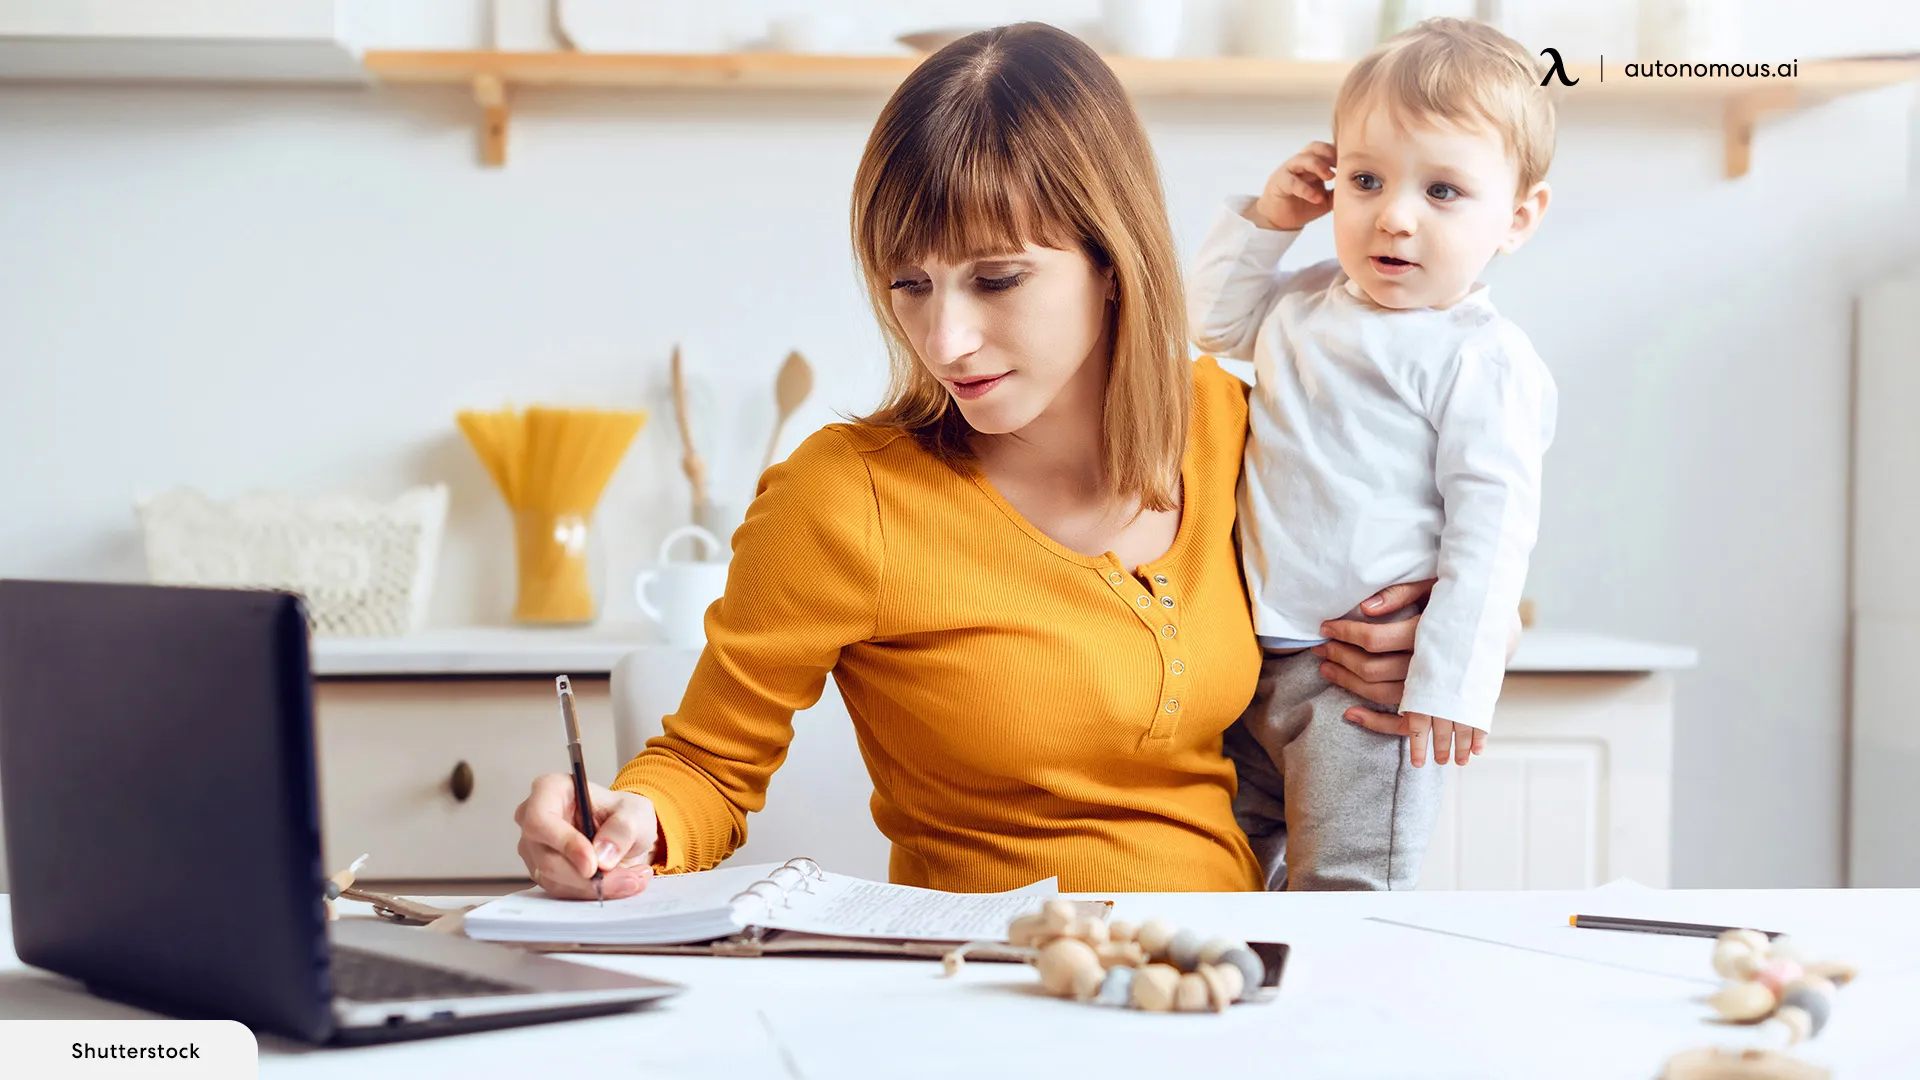 Why Is It Important to Balance Work and Family?